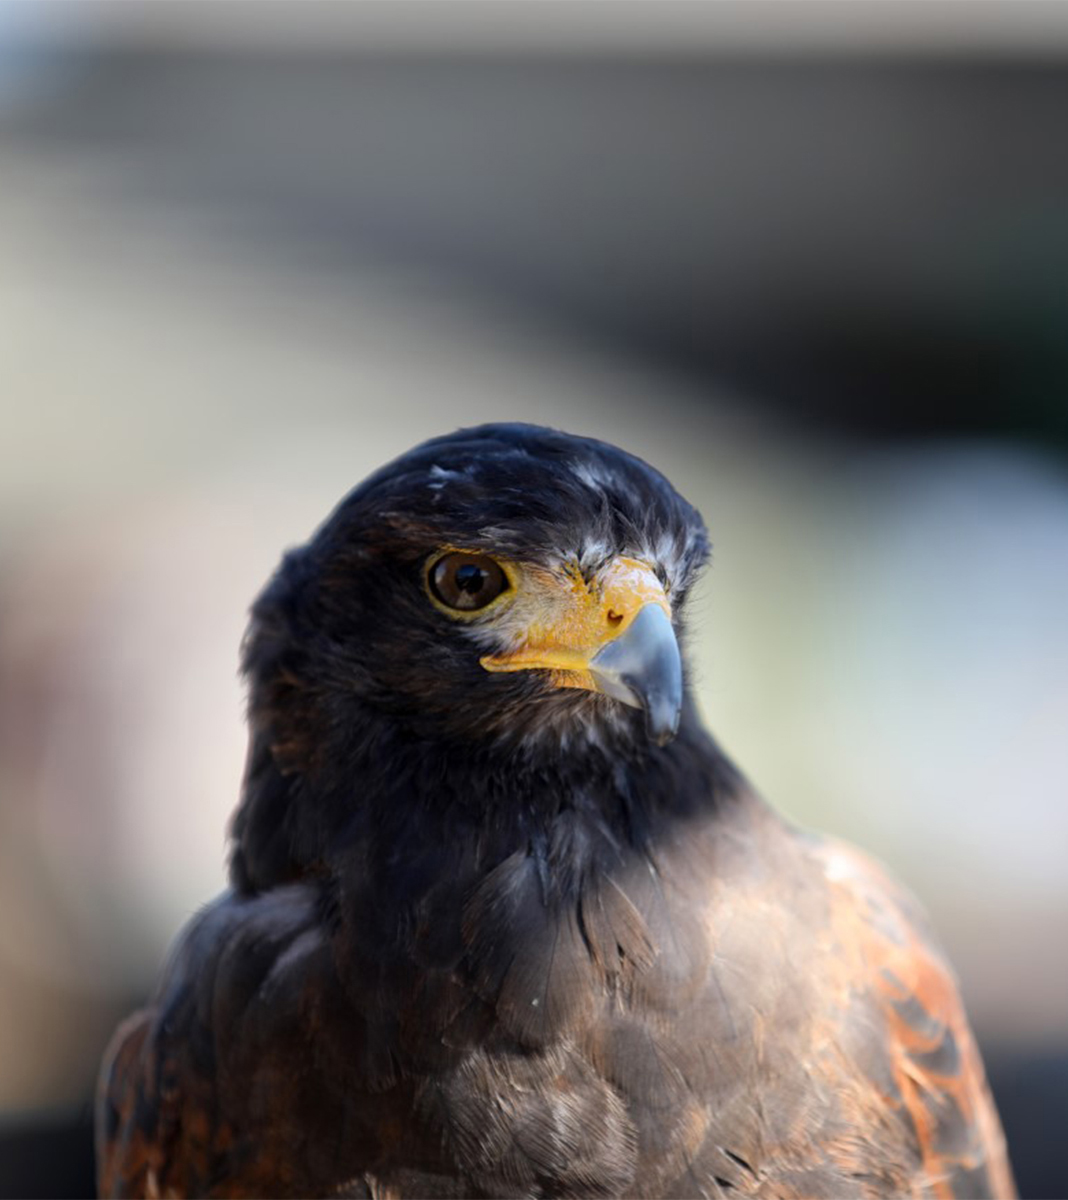 A close-up of a hawk with dark feathers and yellow eyes gazes into the distance. Its sharp beak is prominently displayed against a blurred, neutral background.